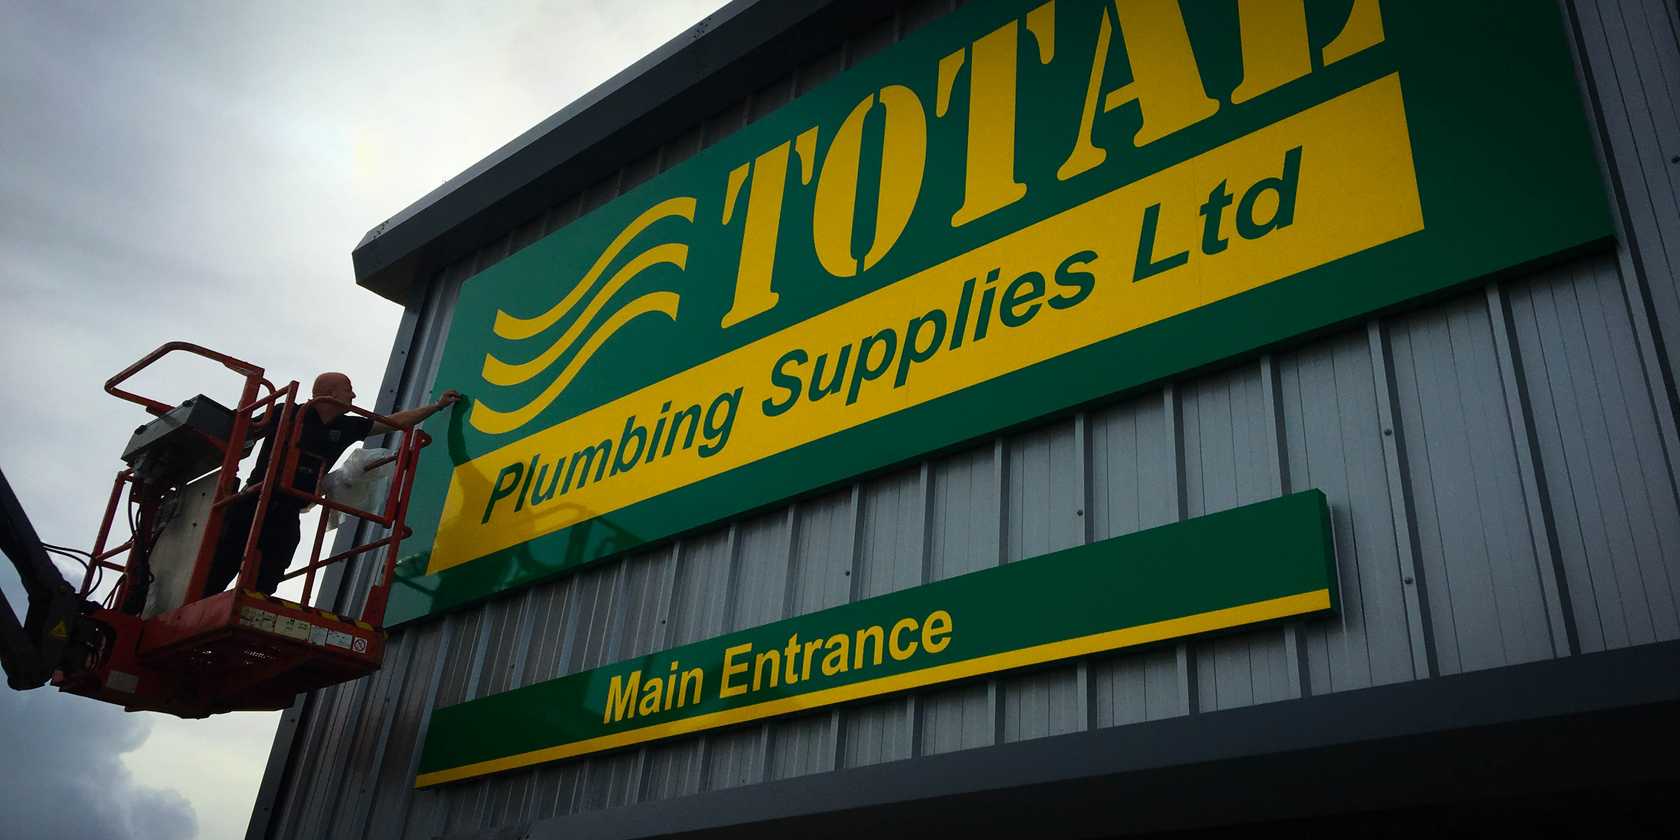 Signage Installation for Total Plumbing Supplies